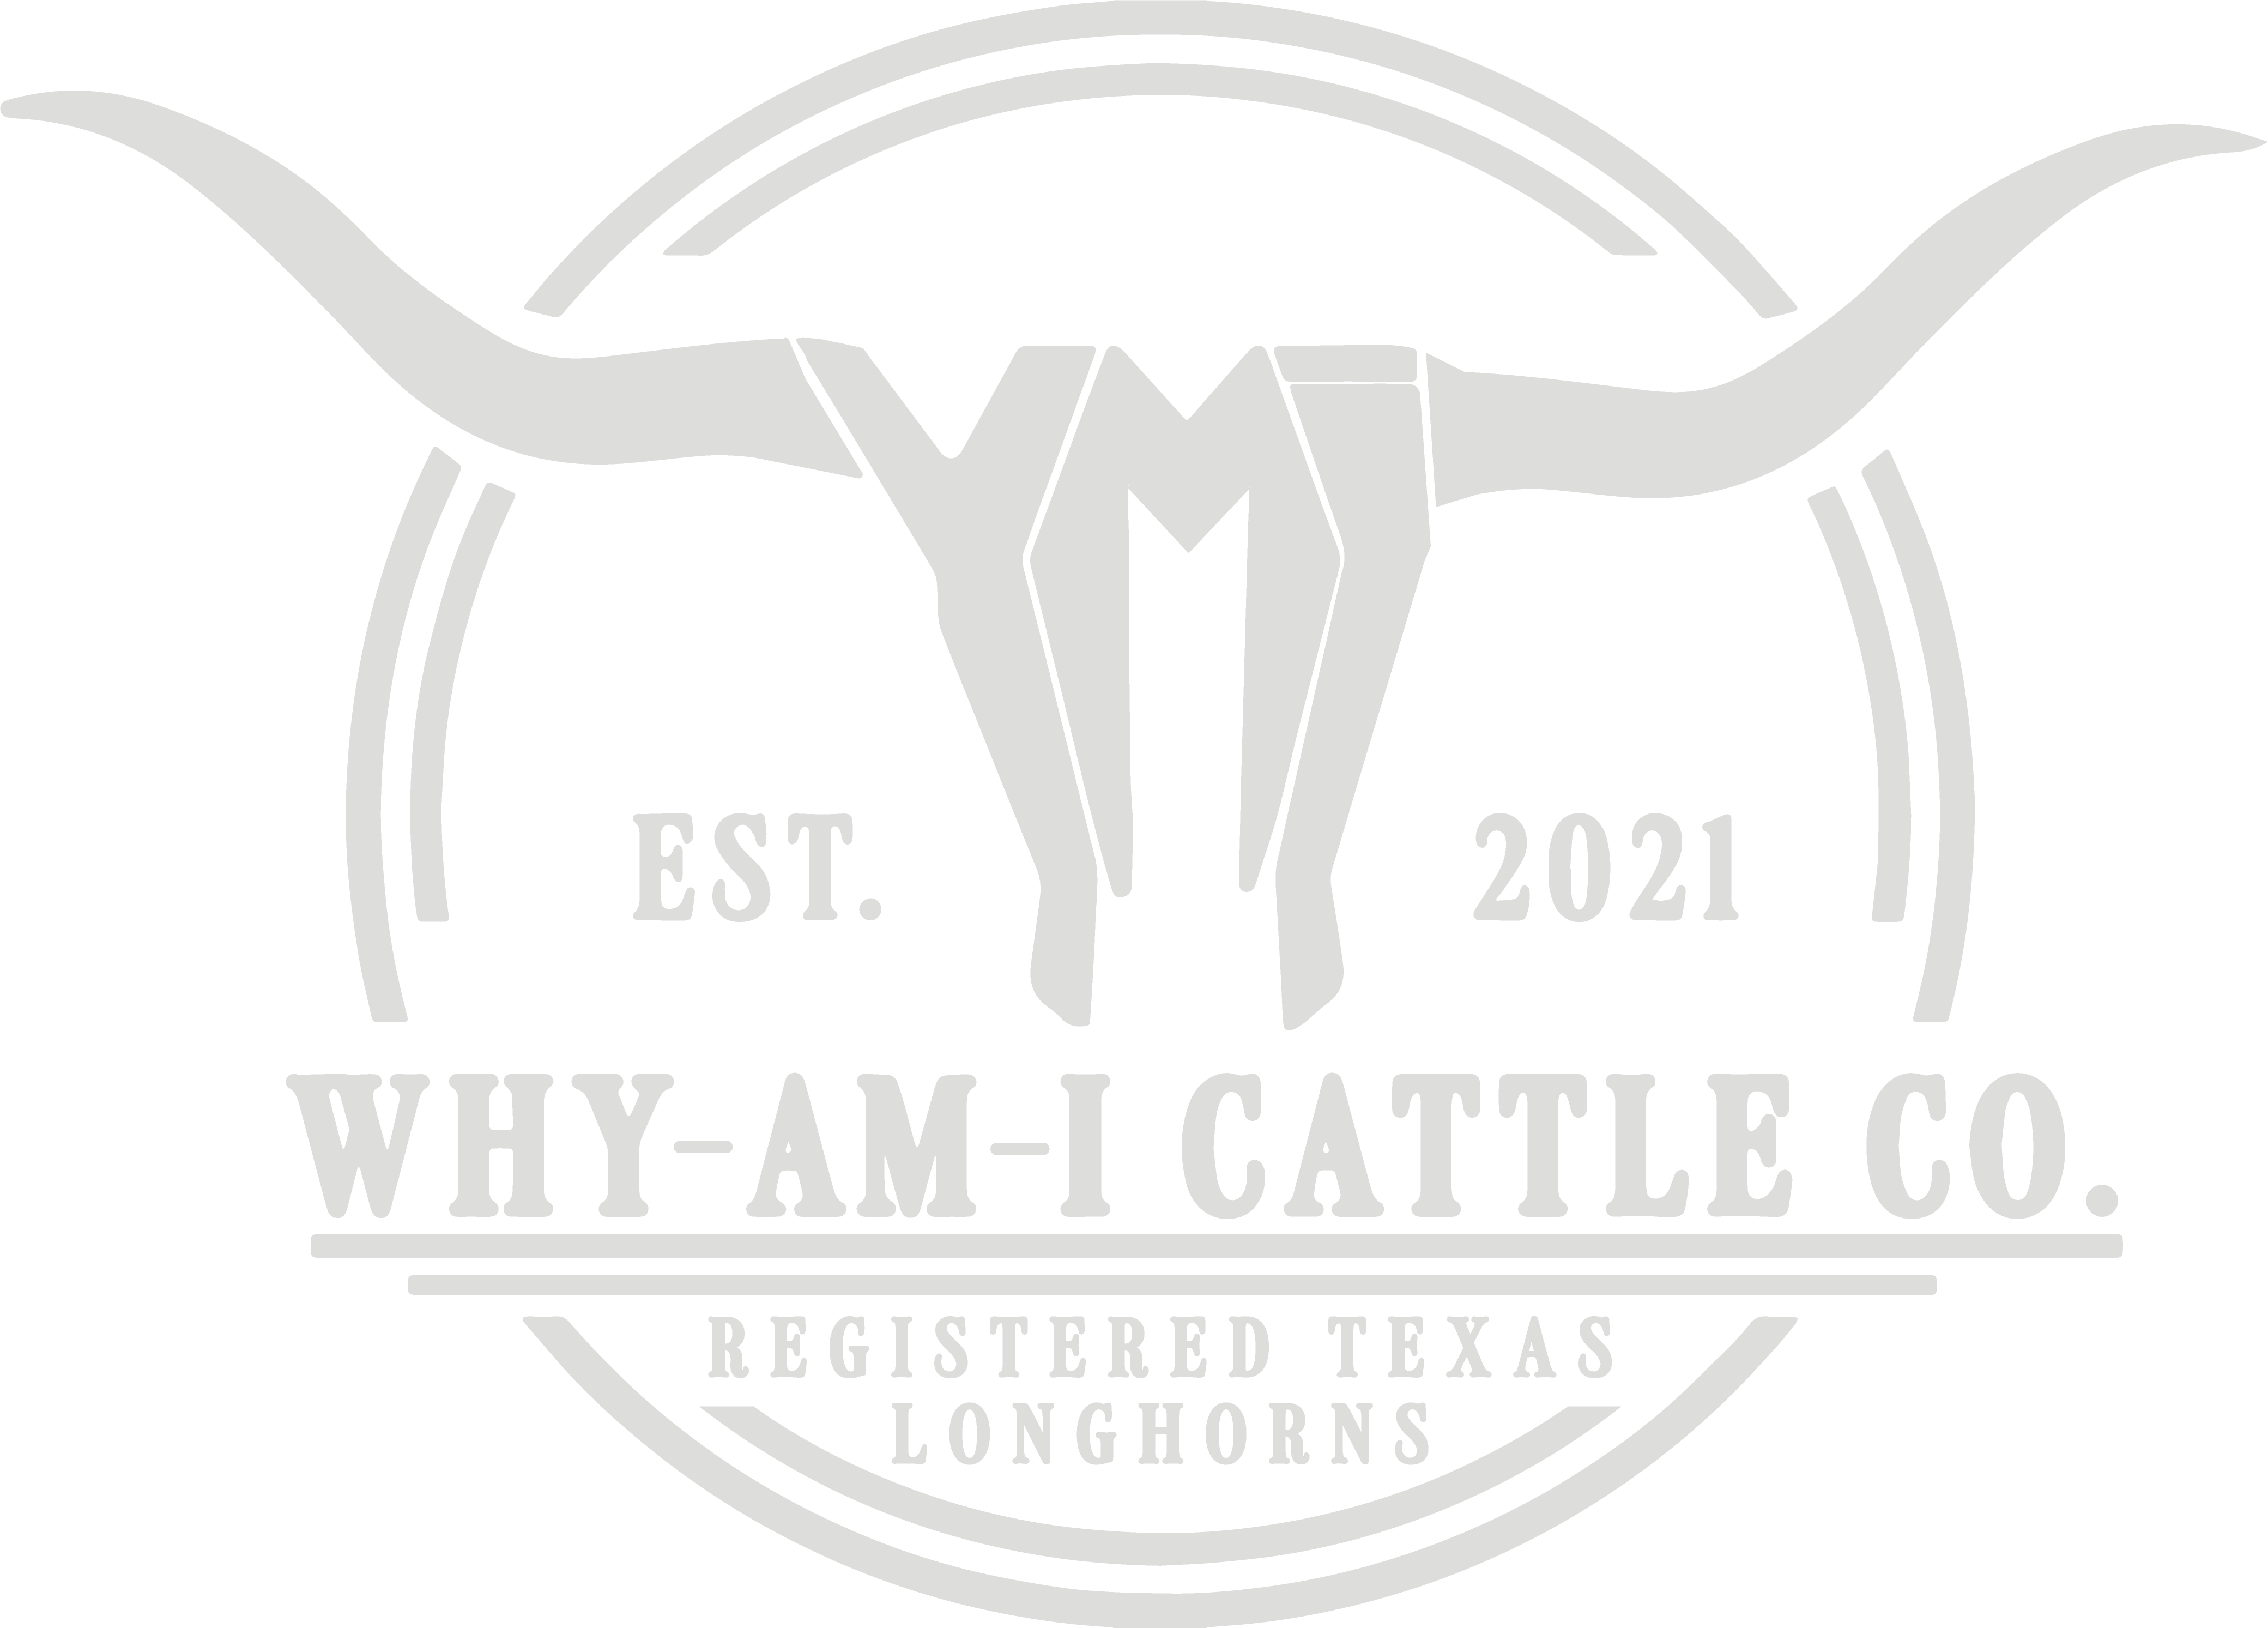 Why Am I Cattle Co. logo